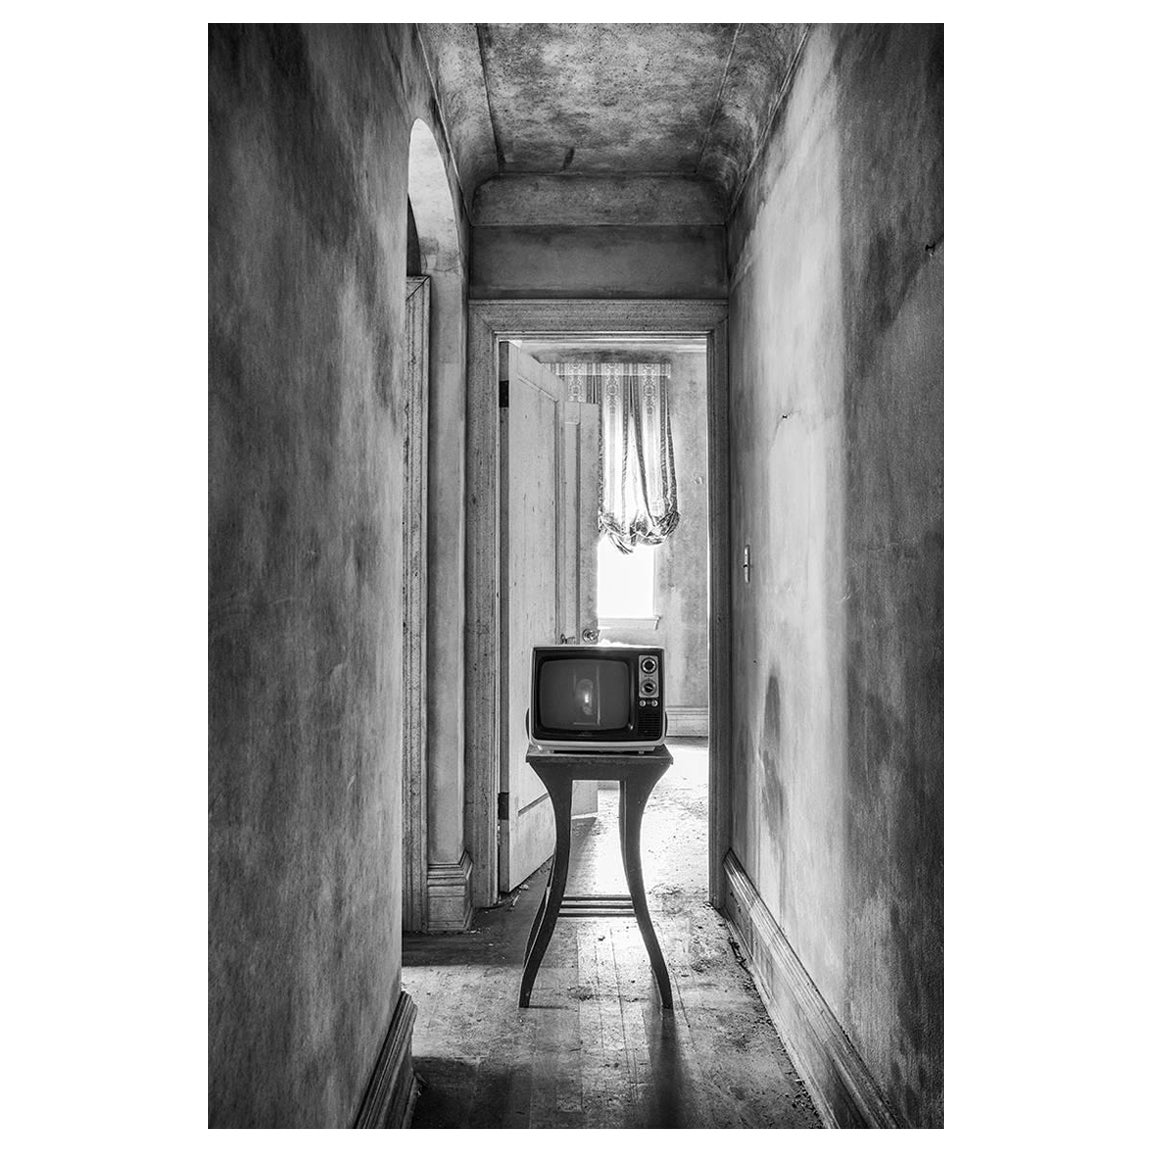 "Showtime", contemporary, television, abandoned, black and white, photograph